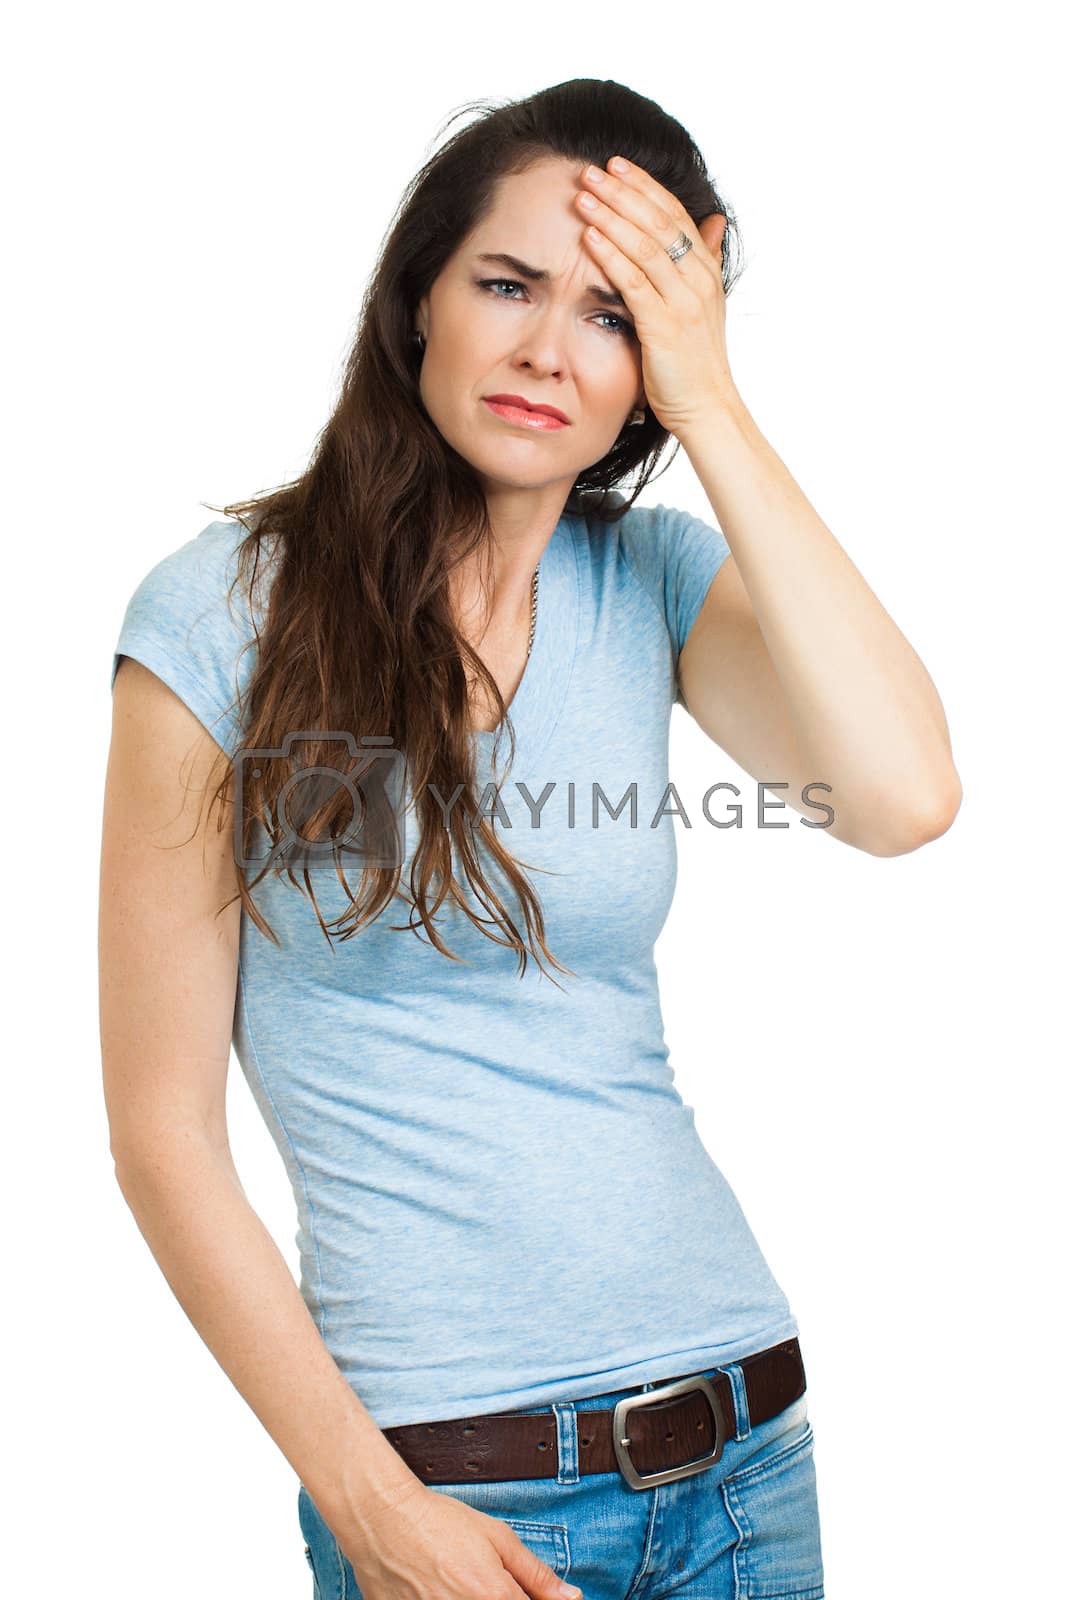 Royalty free image of Woman suffering from migraine by Jaykayl